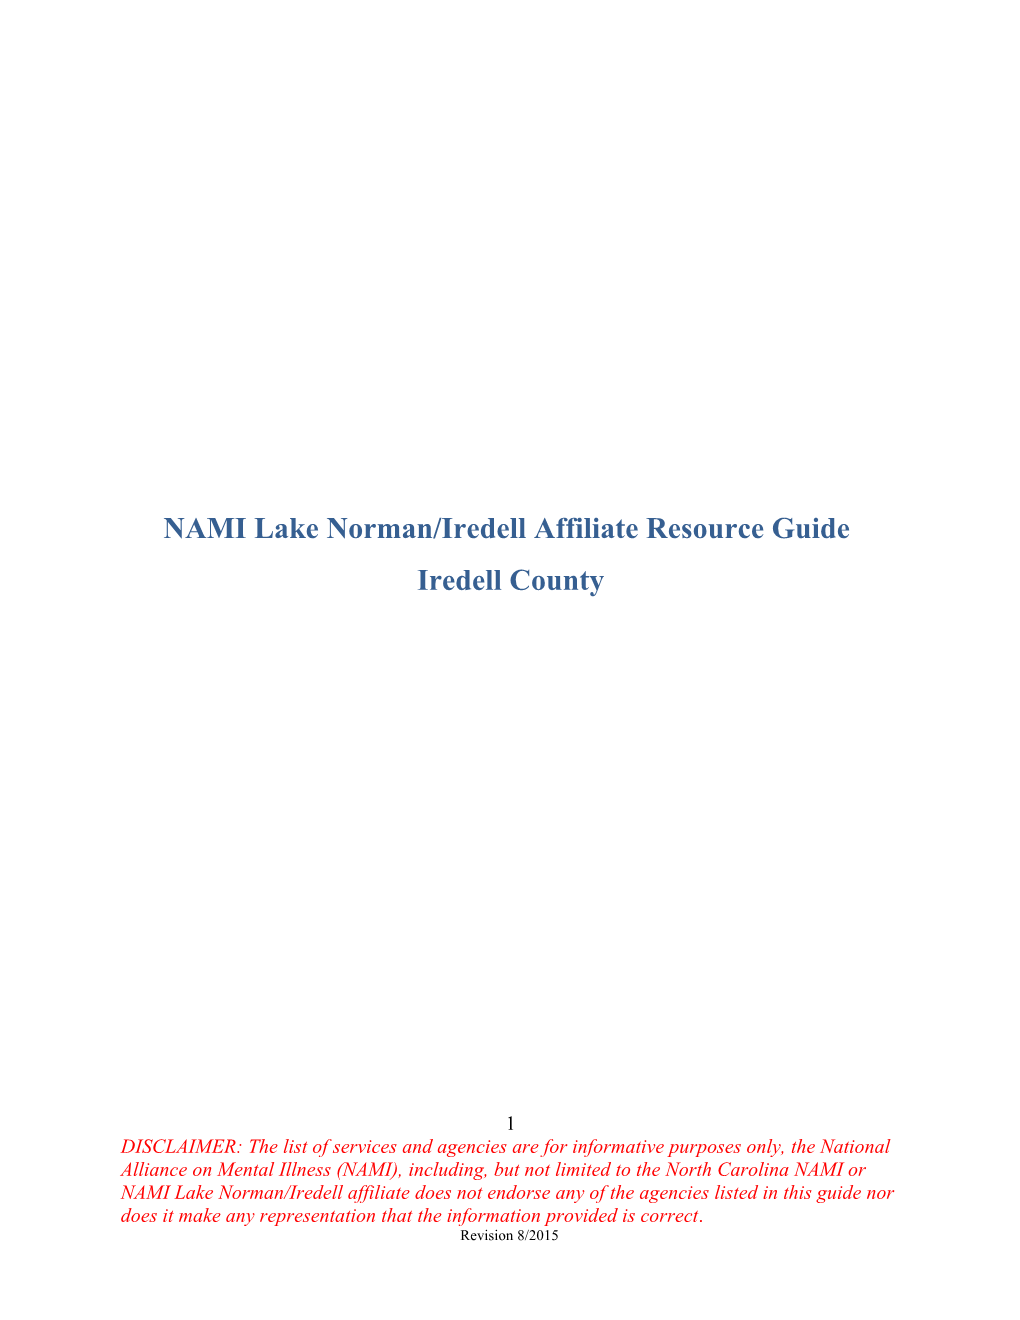 NAMI Lake Norman/Iredell Affiliate Resource Guide